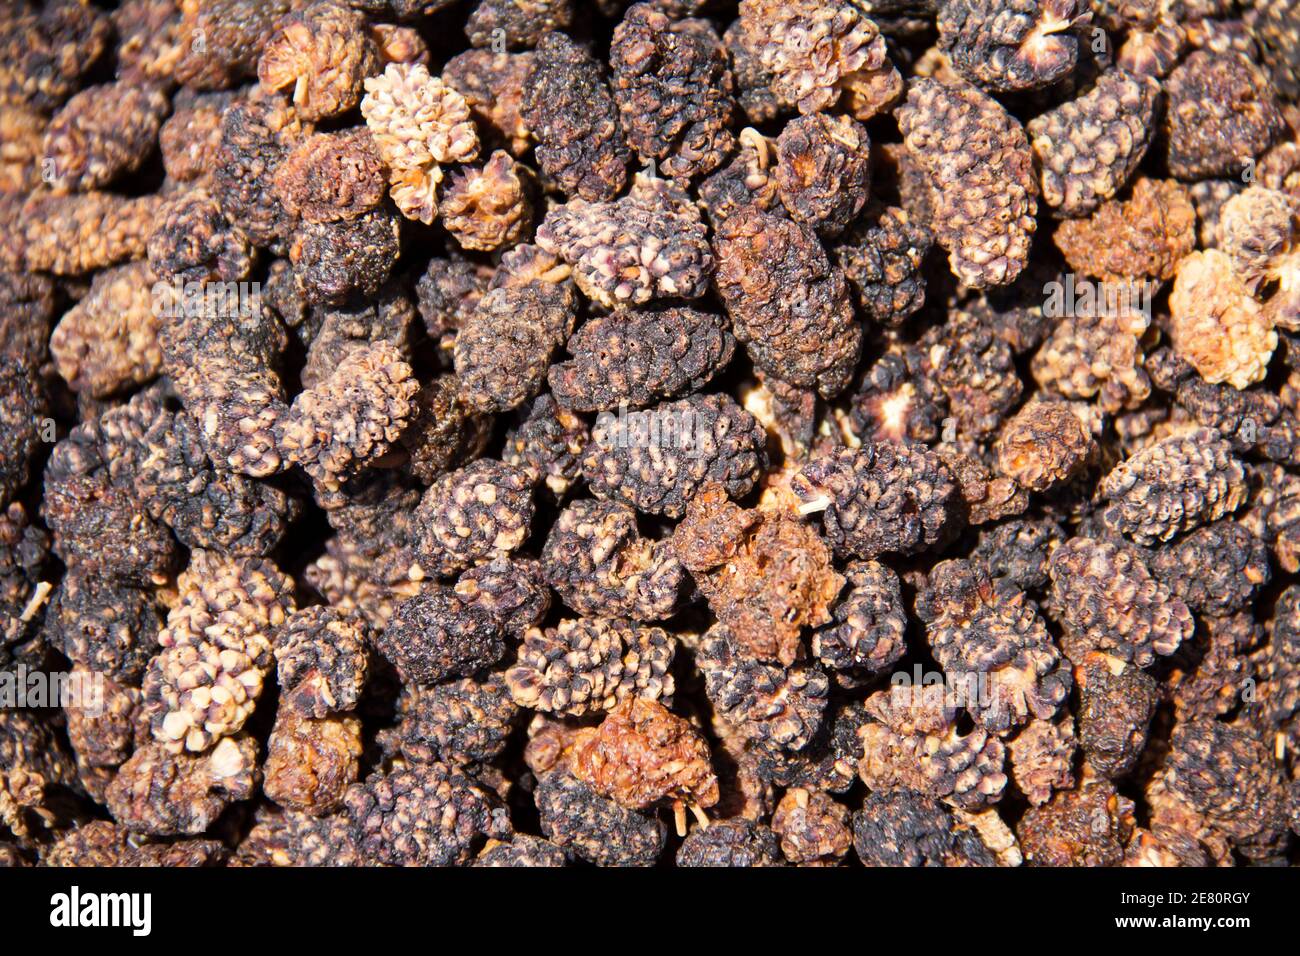 Dried mulberry collection,Chinese traditional food Stock Photo